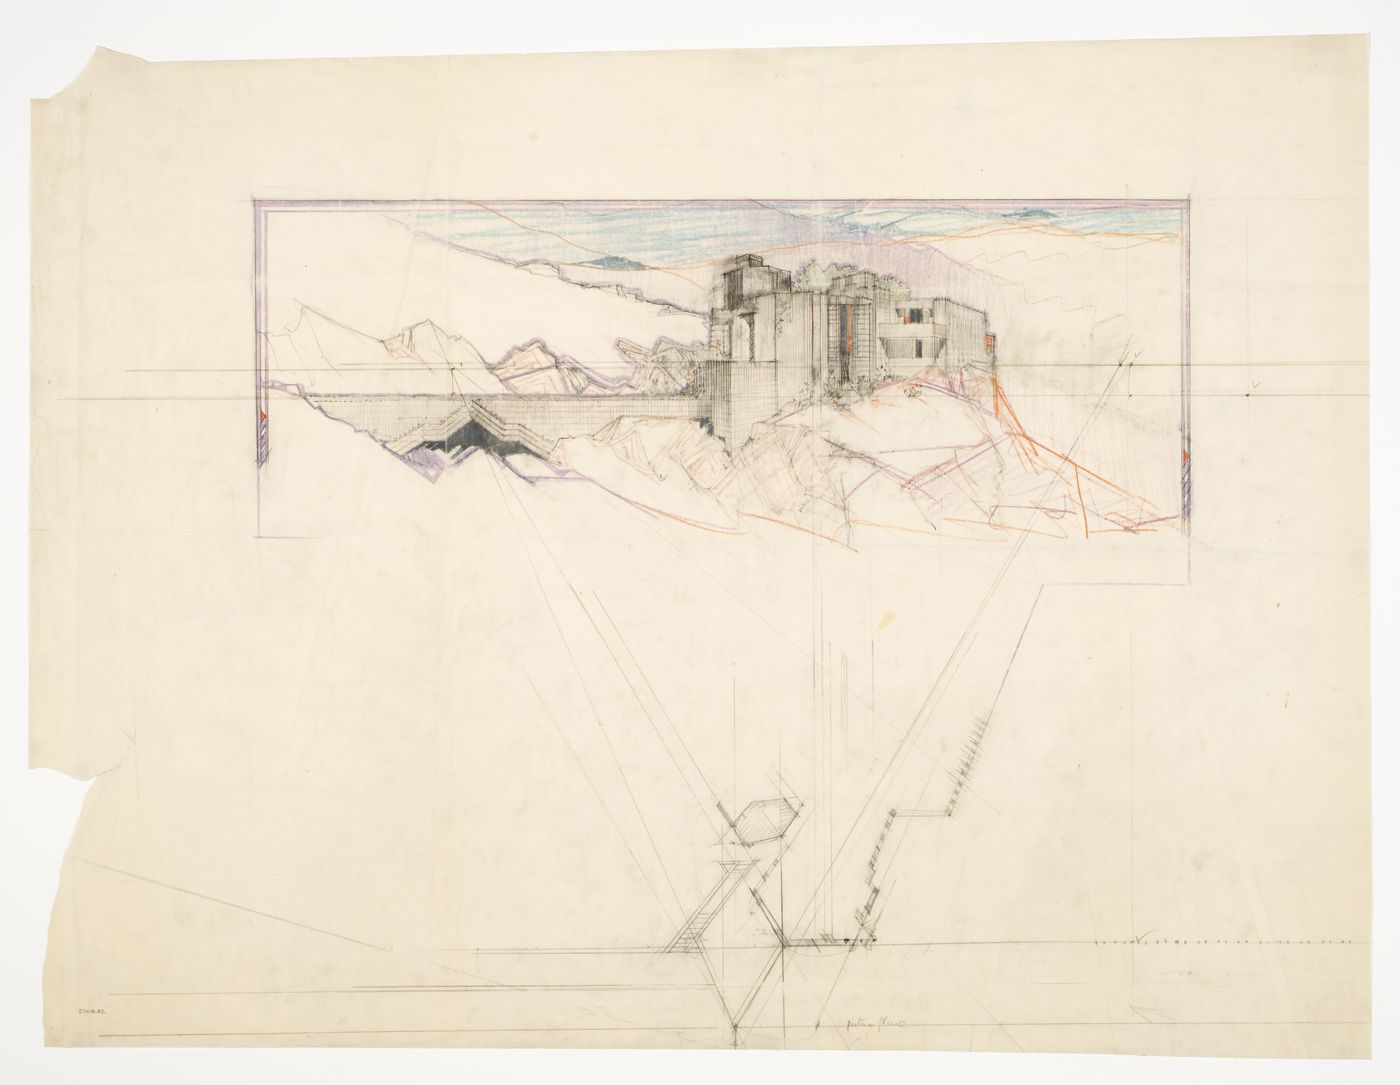 Wellington and Ralph Cudney House, San Marcos in the Desert, Arizona: perspective and partial plan / Wellington and Ralph Cudney House, San Marcos in the Desert, Arizona : perspective et plan partiel